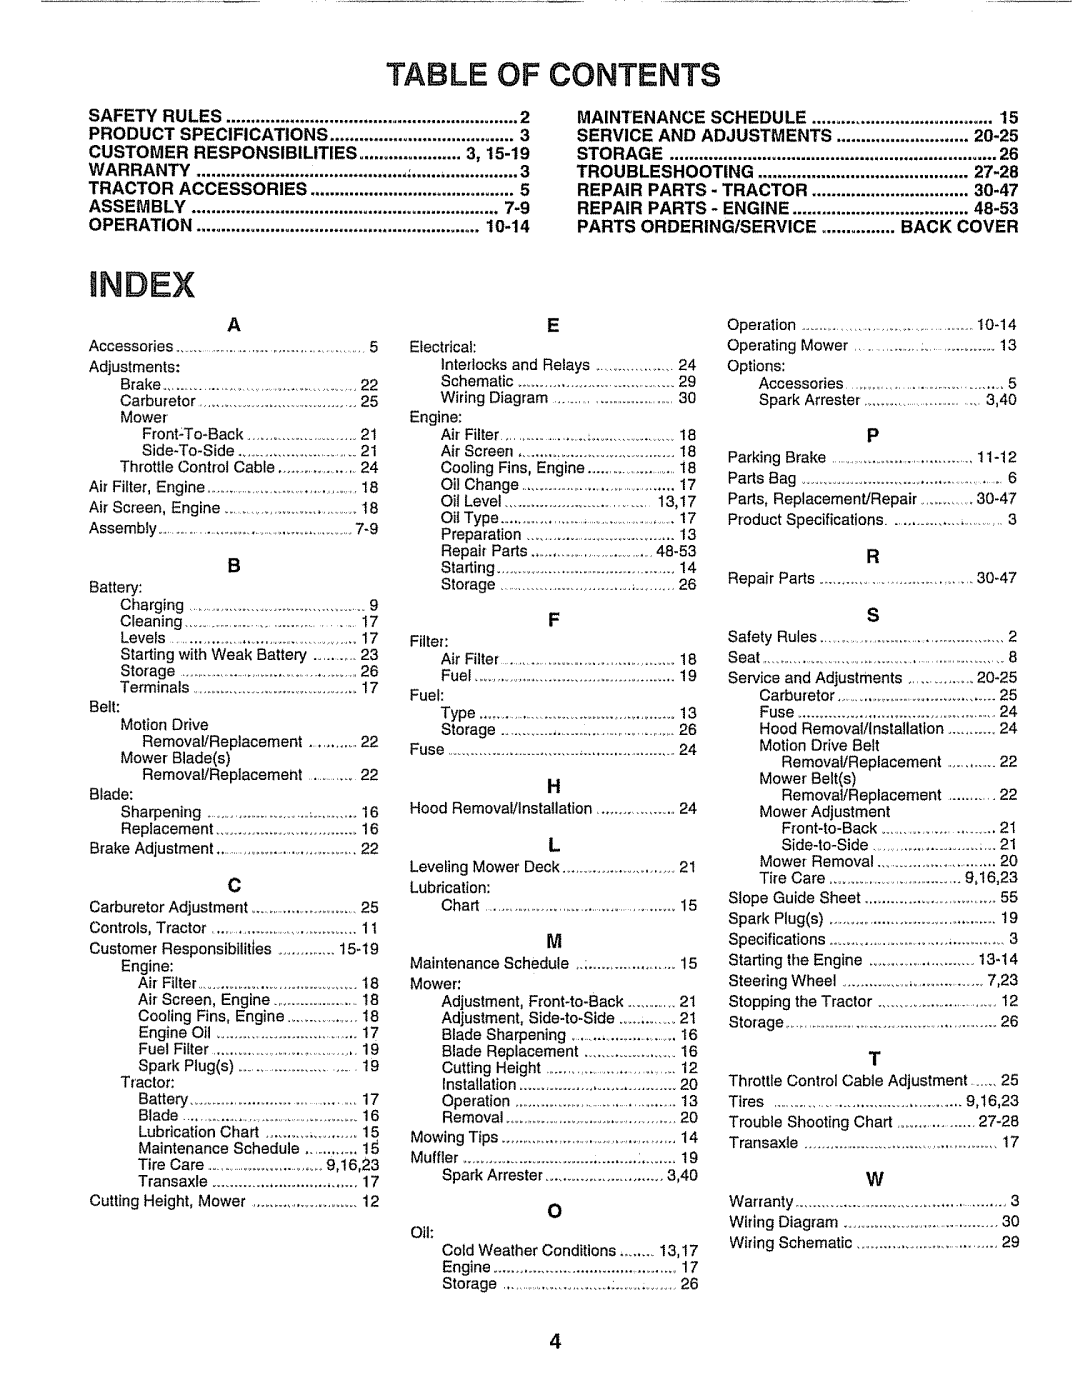 Craftsman 917.25651 owner manual Index, Table Of Contents 